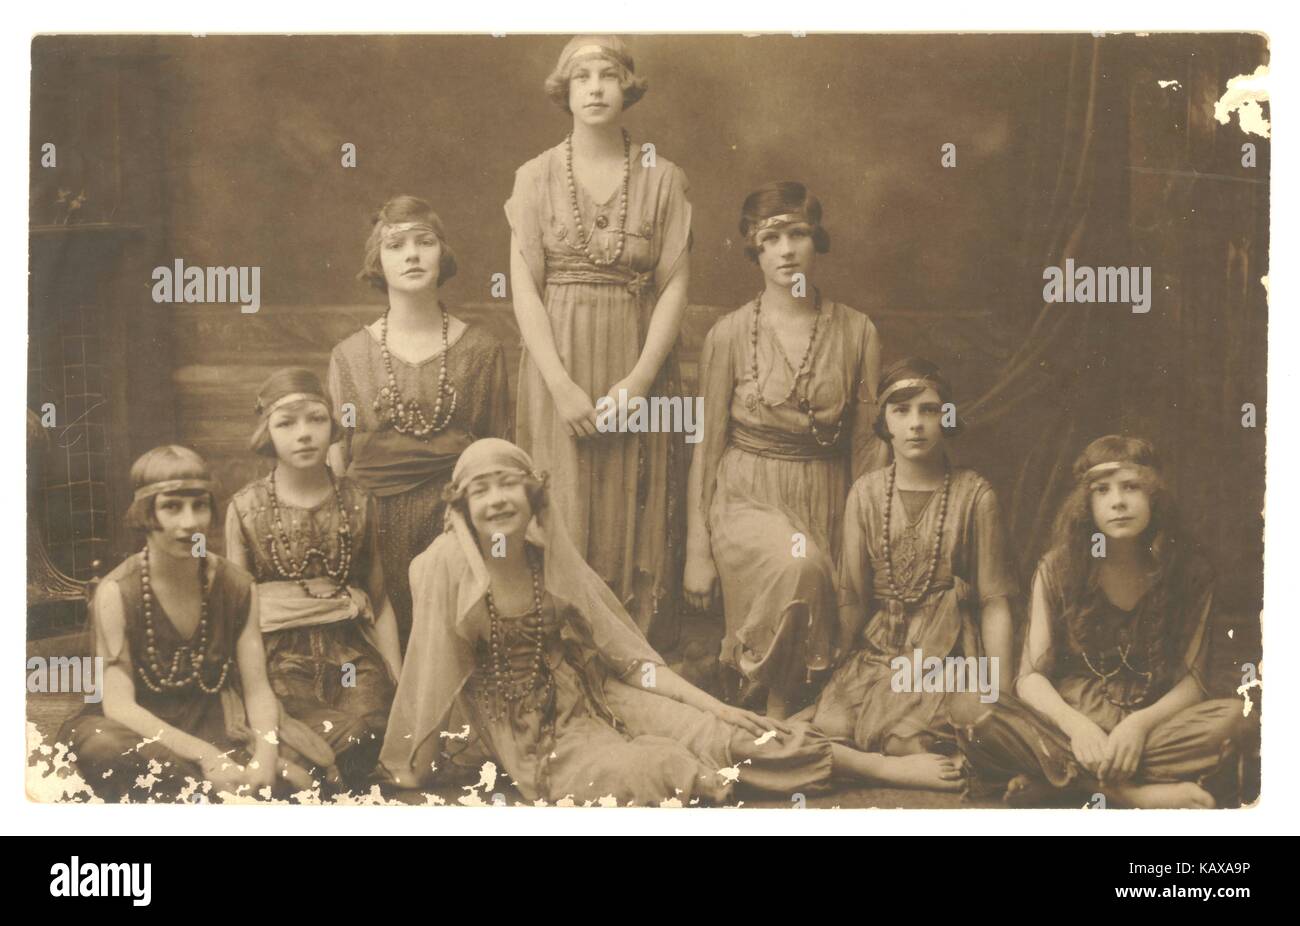 1920s postcard of girls posing, possibly in dance costumes, with fashionable bobbed flapper style hair cuts and headbands, long dresses, dated 1921 on reverse, U.K. Stock Photo